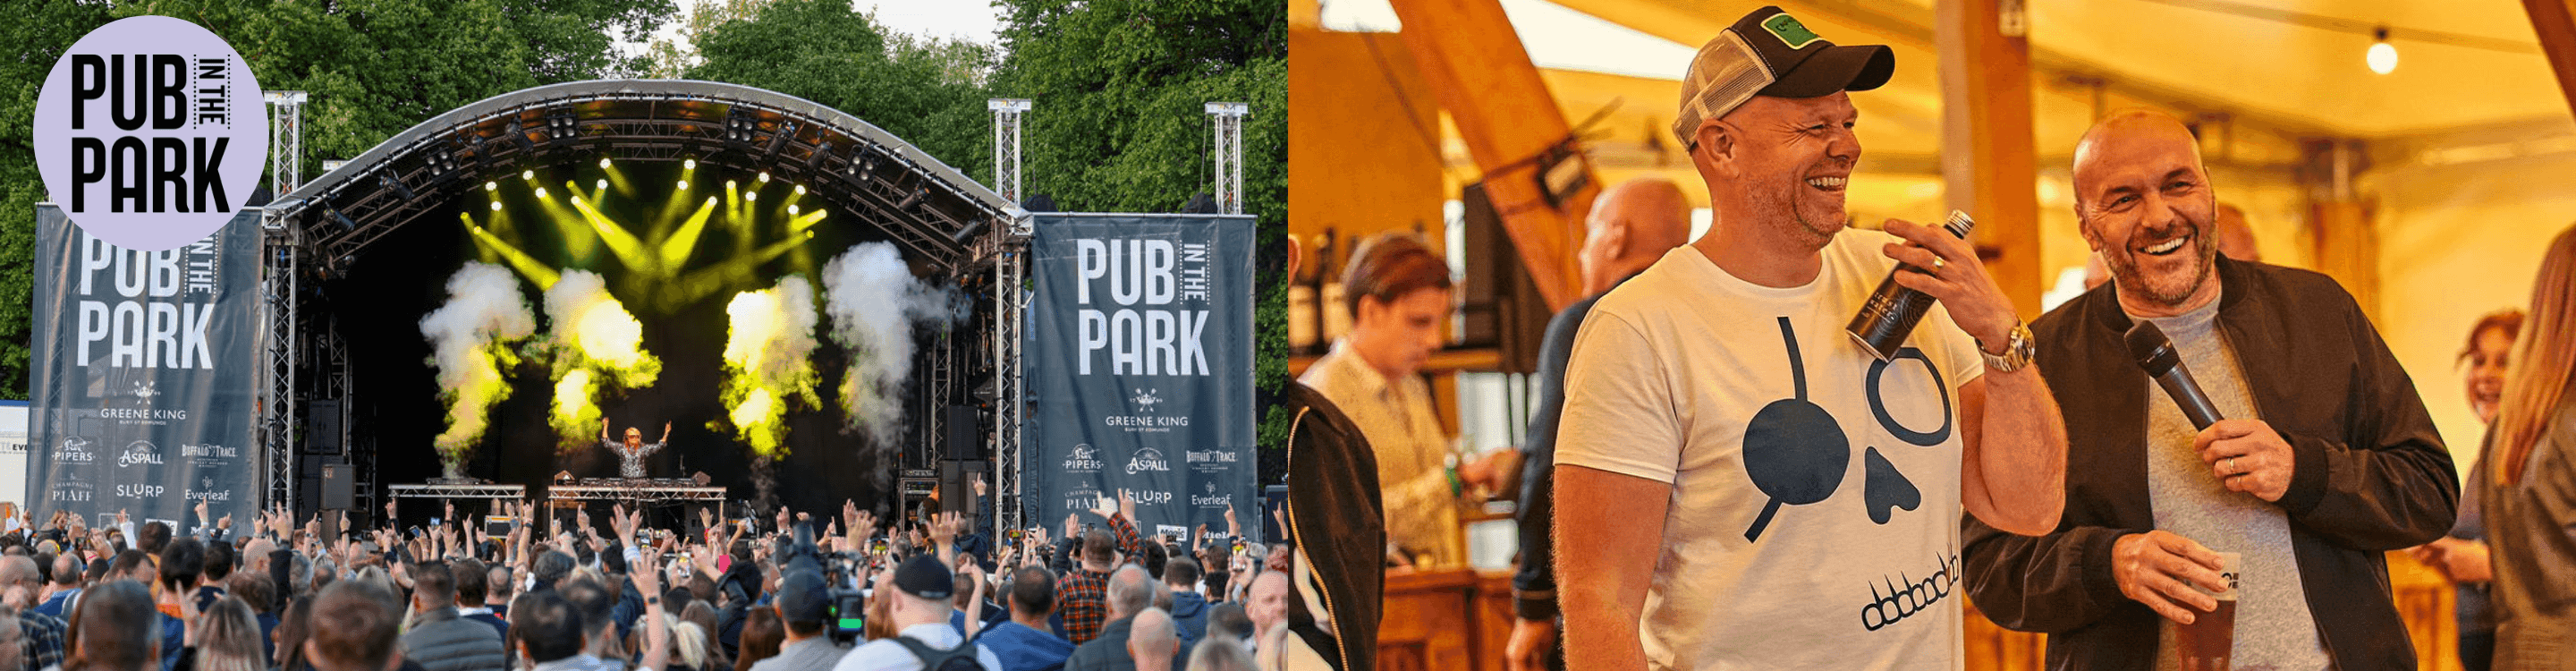 Image of festival with text that says "Pub in the Park. Book tickets now!"